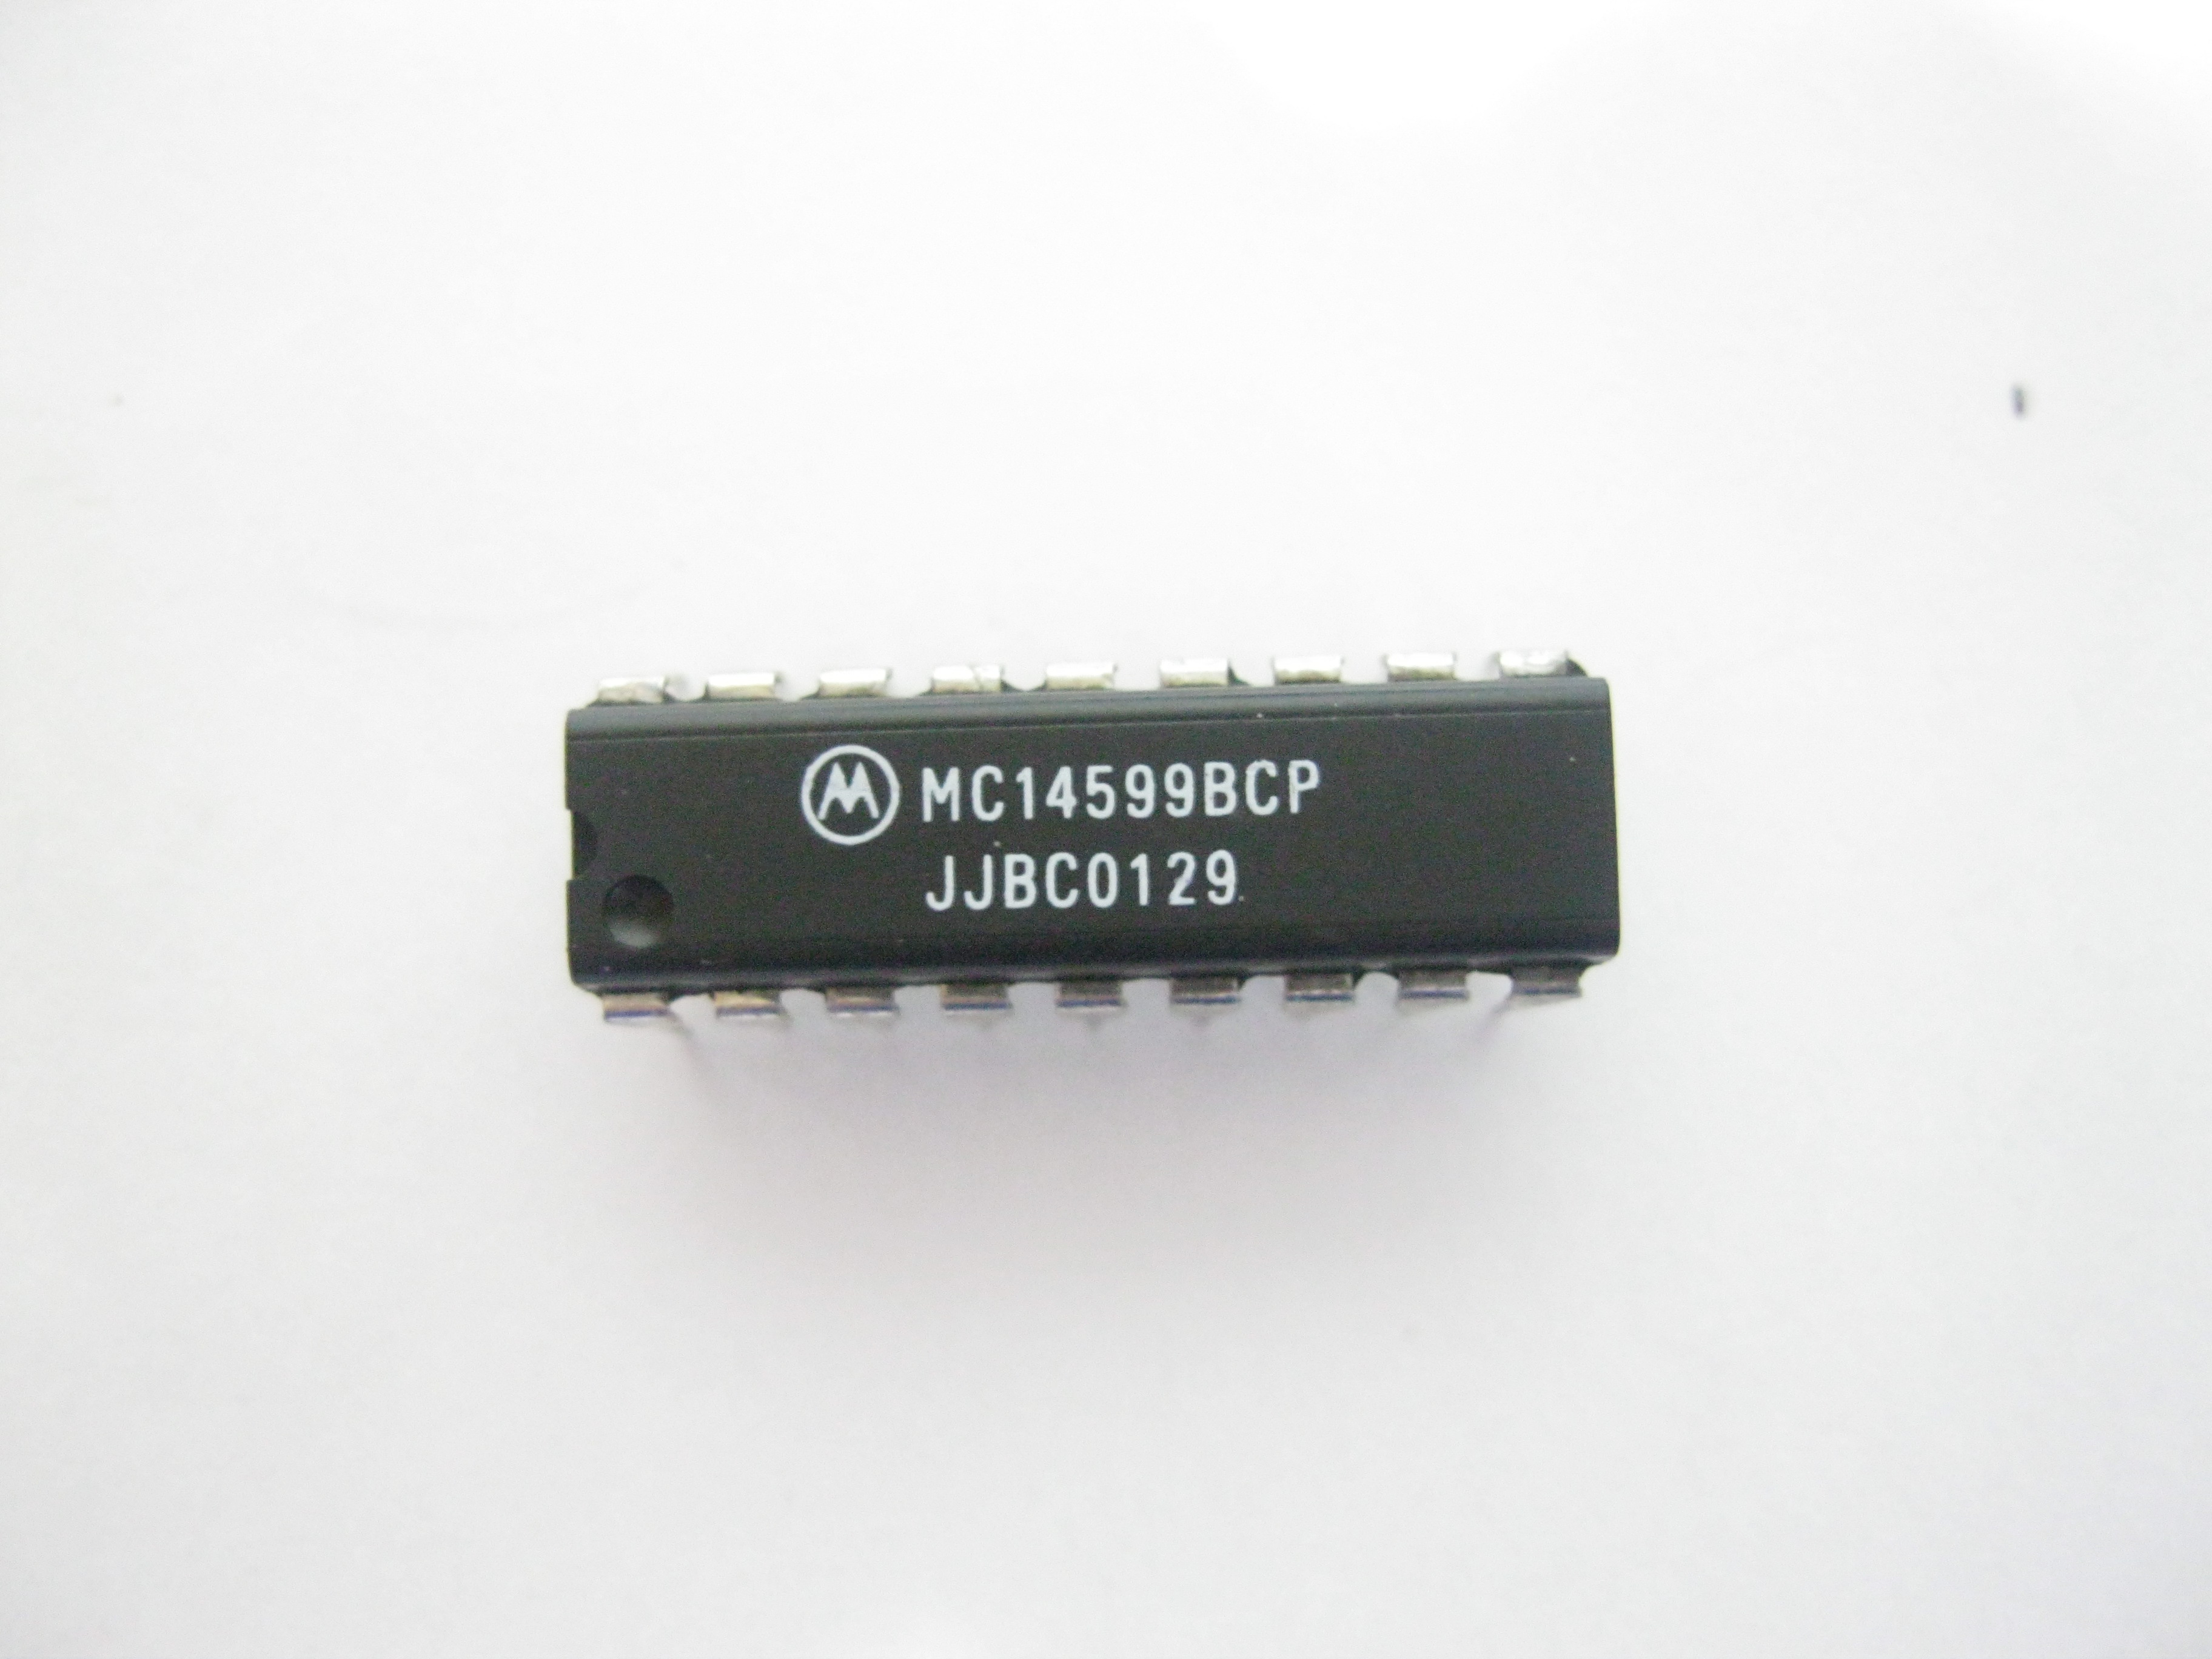 Specialized in IC and passive components, connector, capatance, risistor, inductance and relay